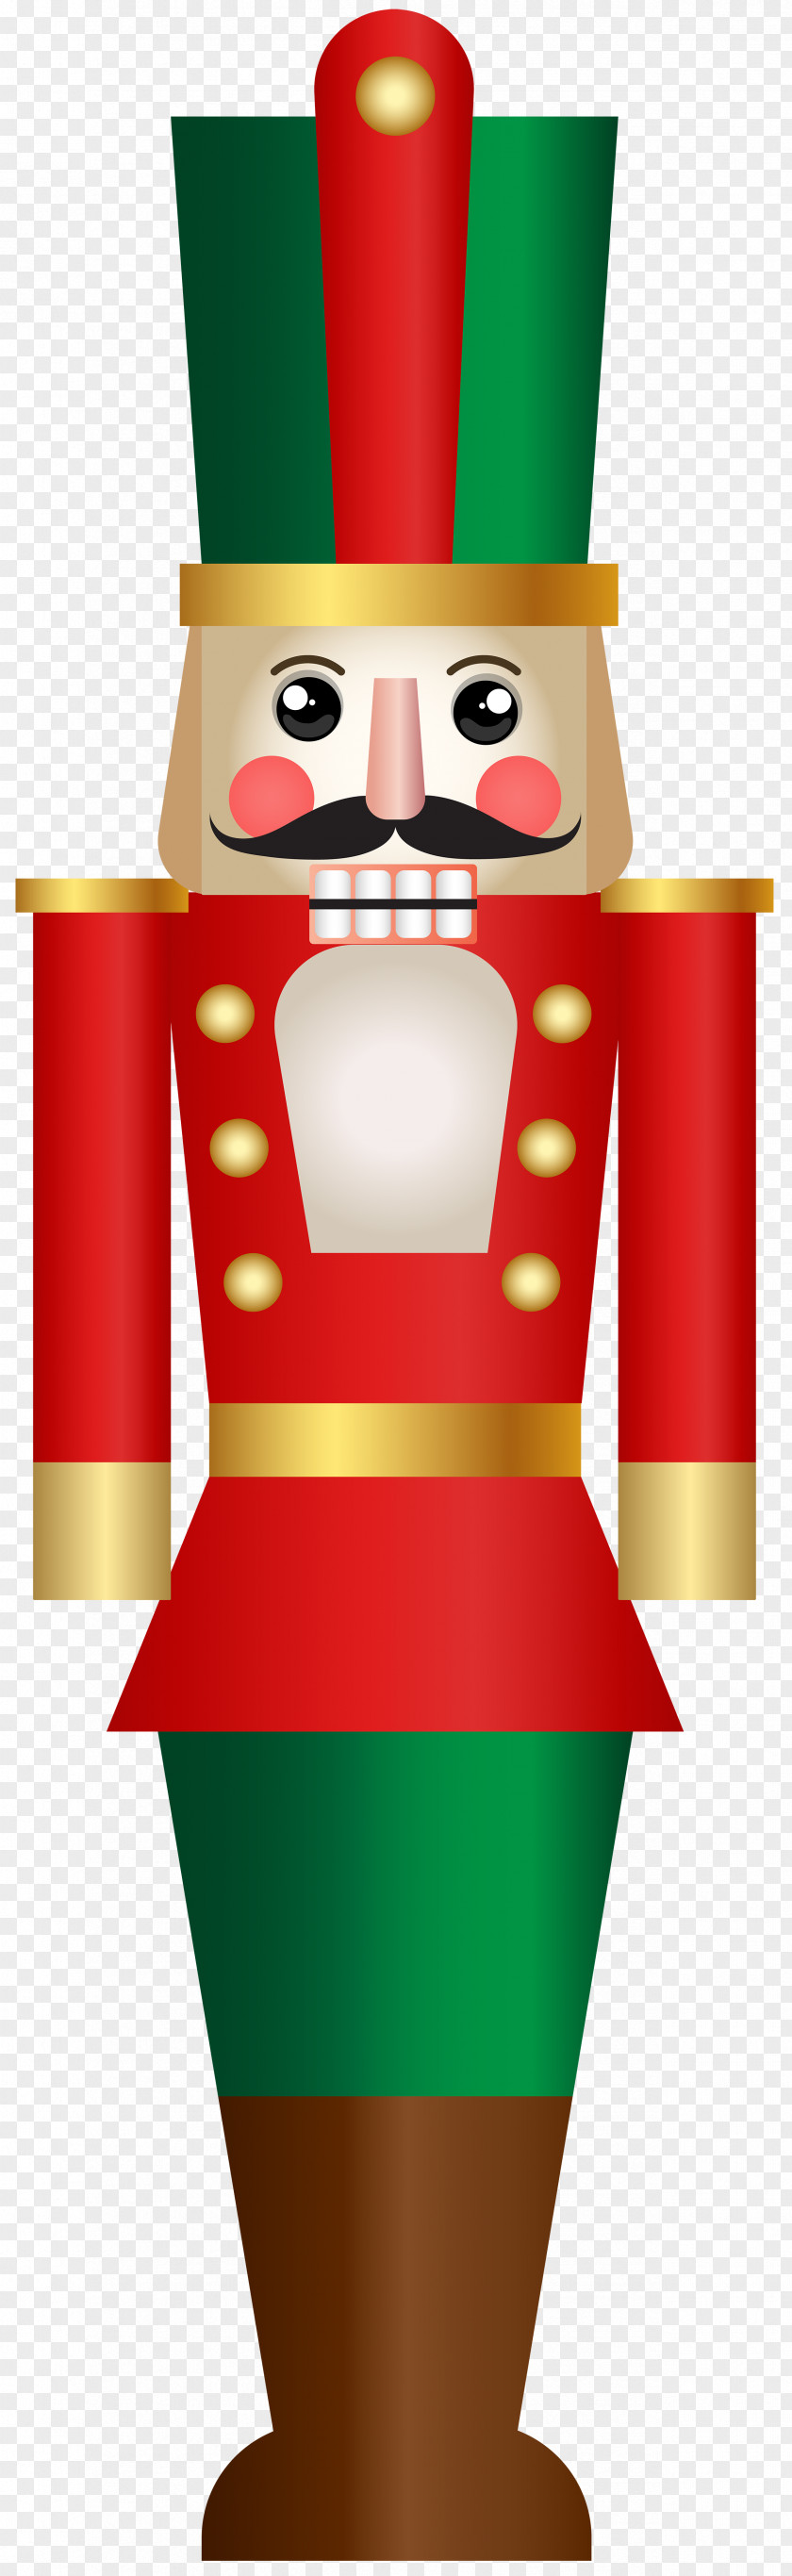 Nutcraker Clip Art The Nutcracker And Mouse King Image PNG